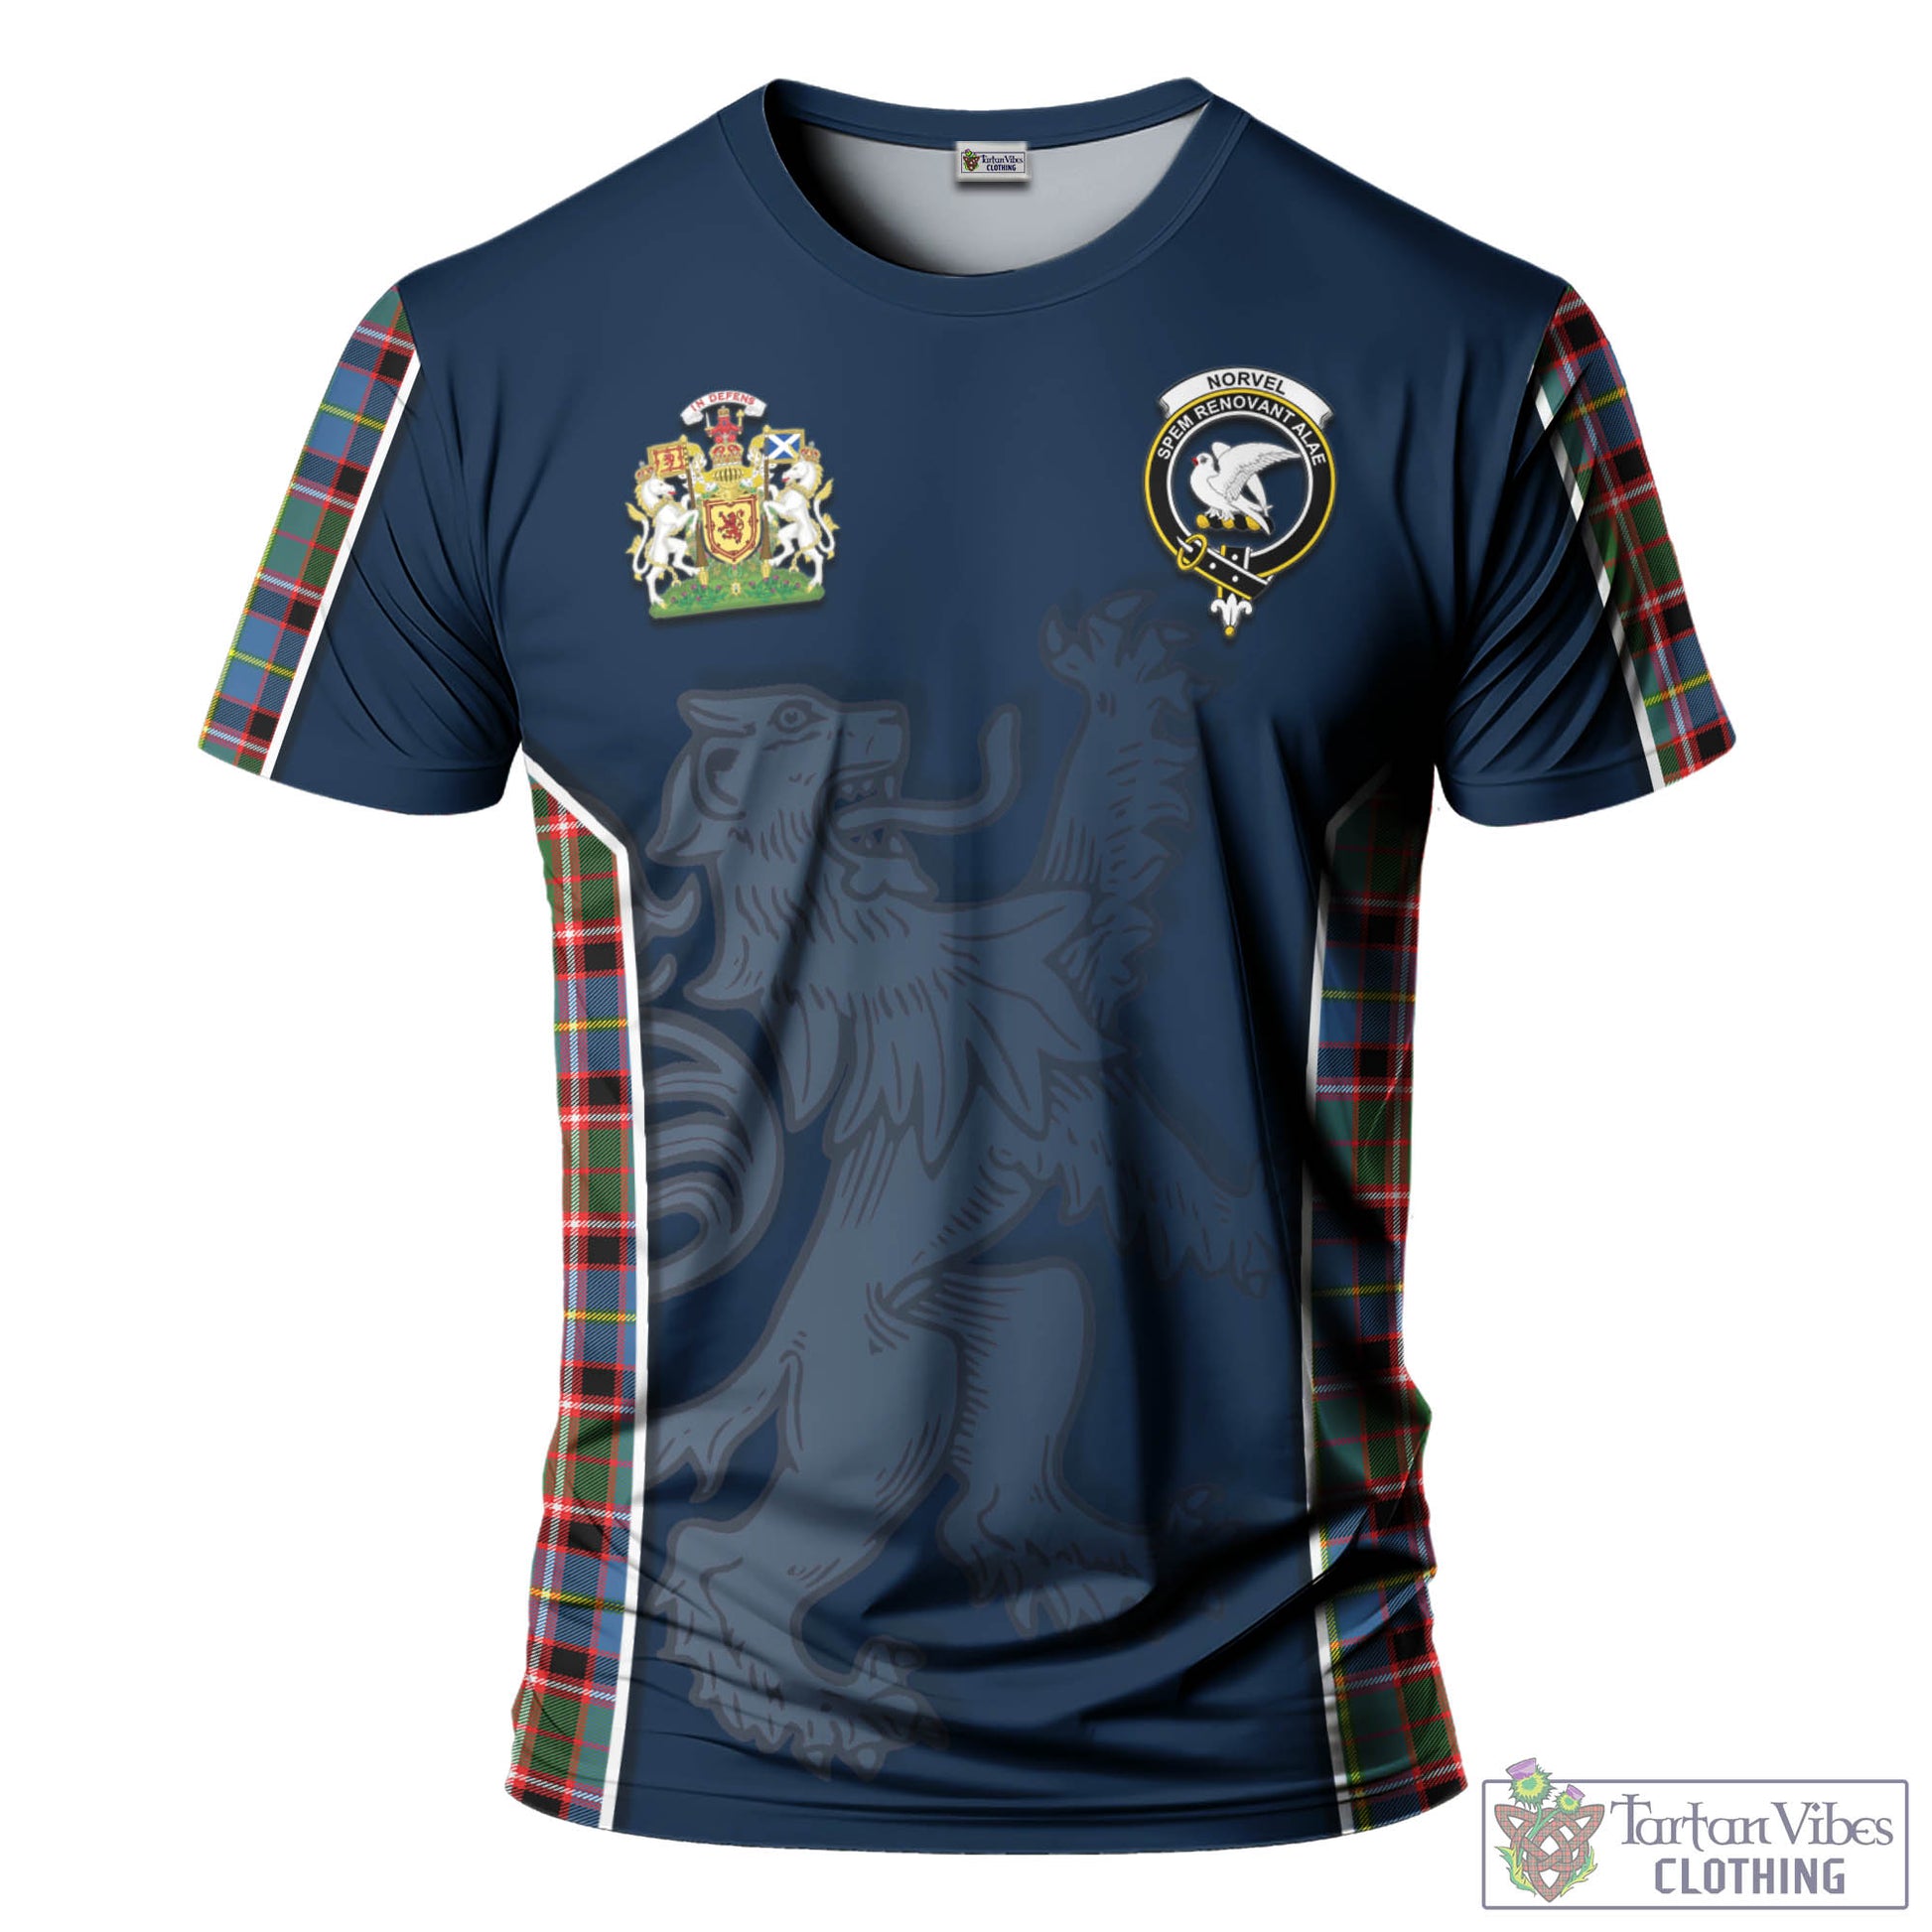 Tartan Vibes Clothing Norvel Tartan T-Shirt with Family Crest and Lion Rampant Vibes Sport Style